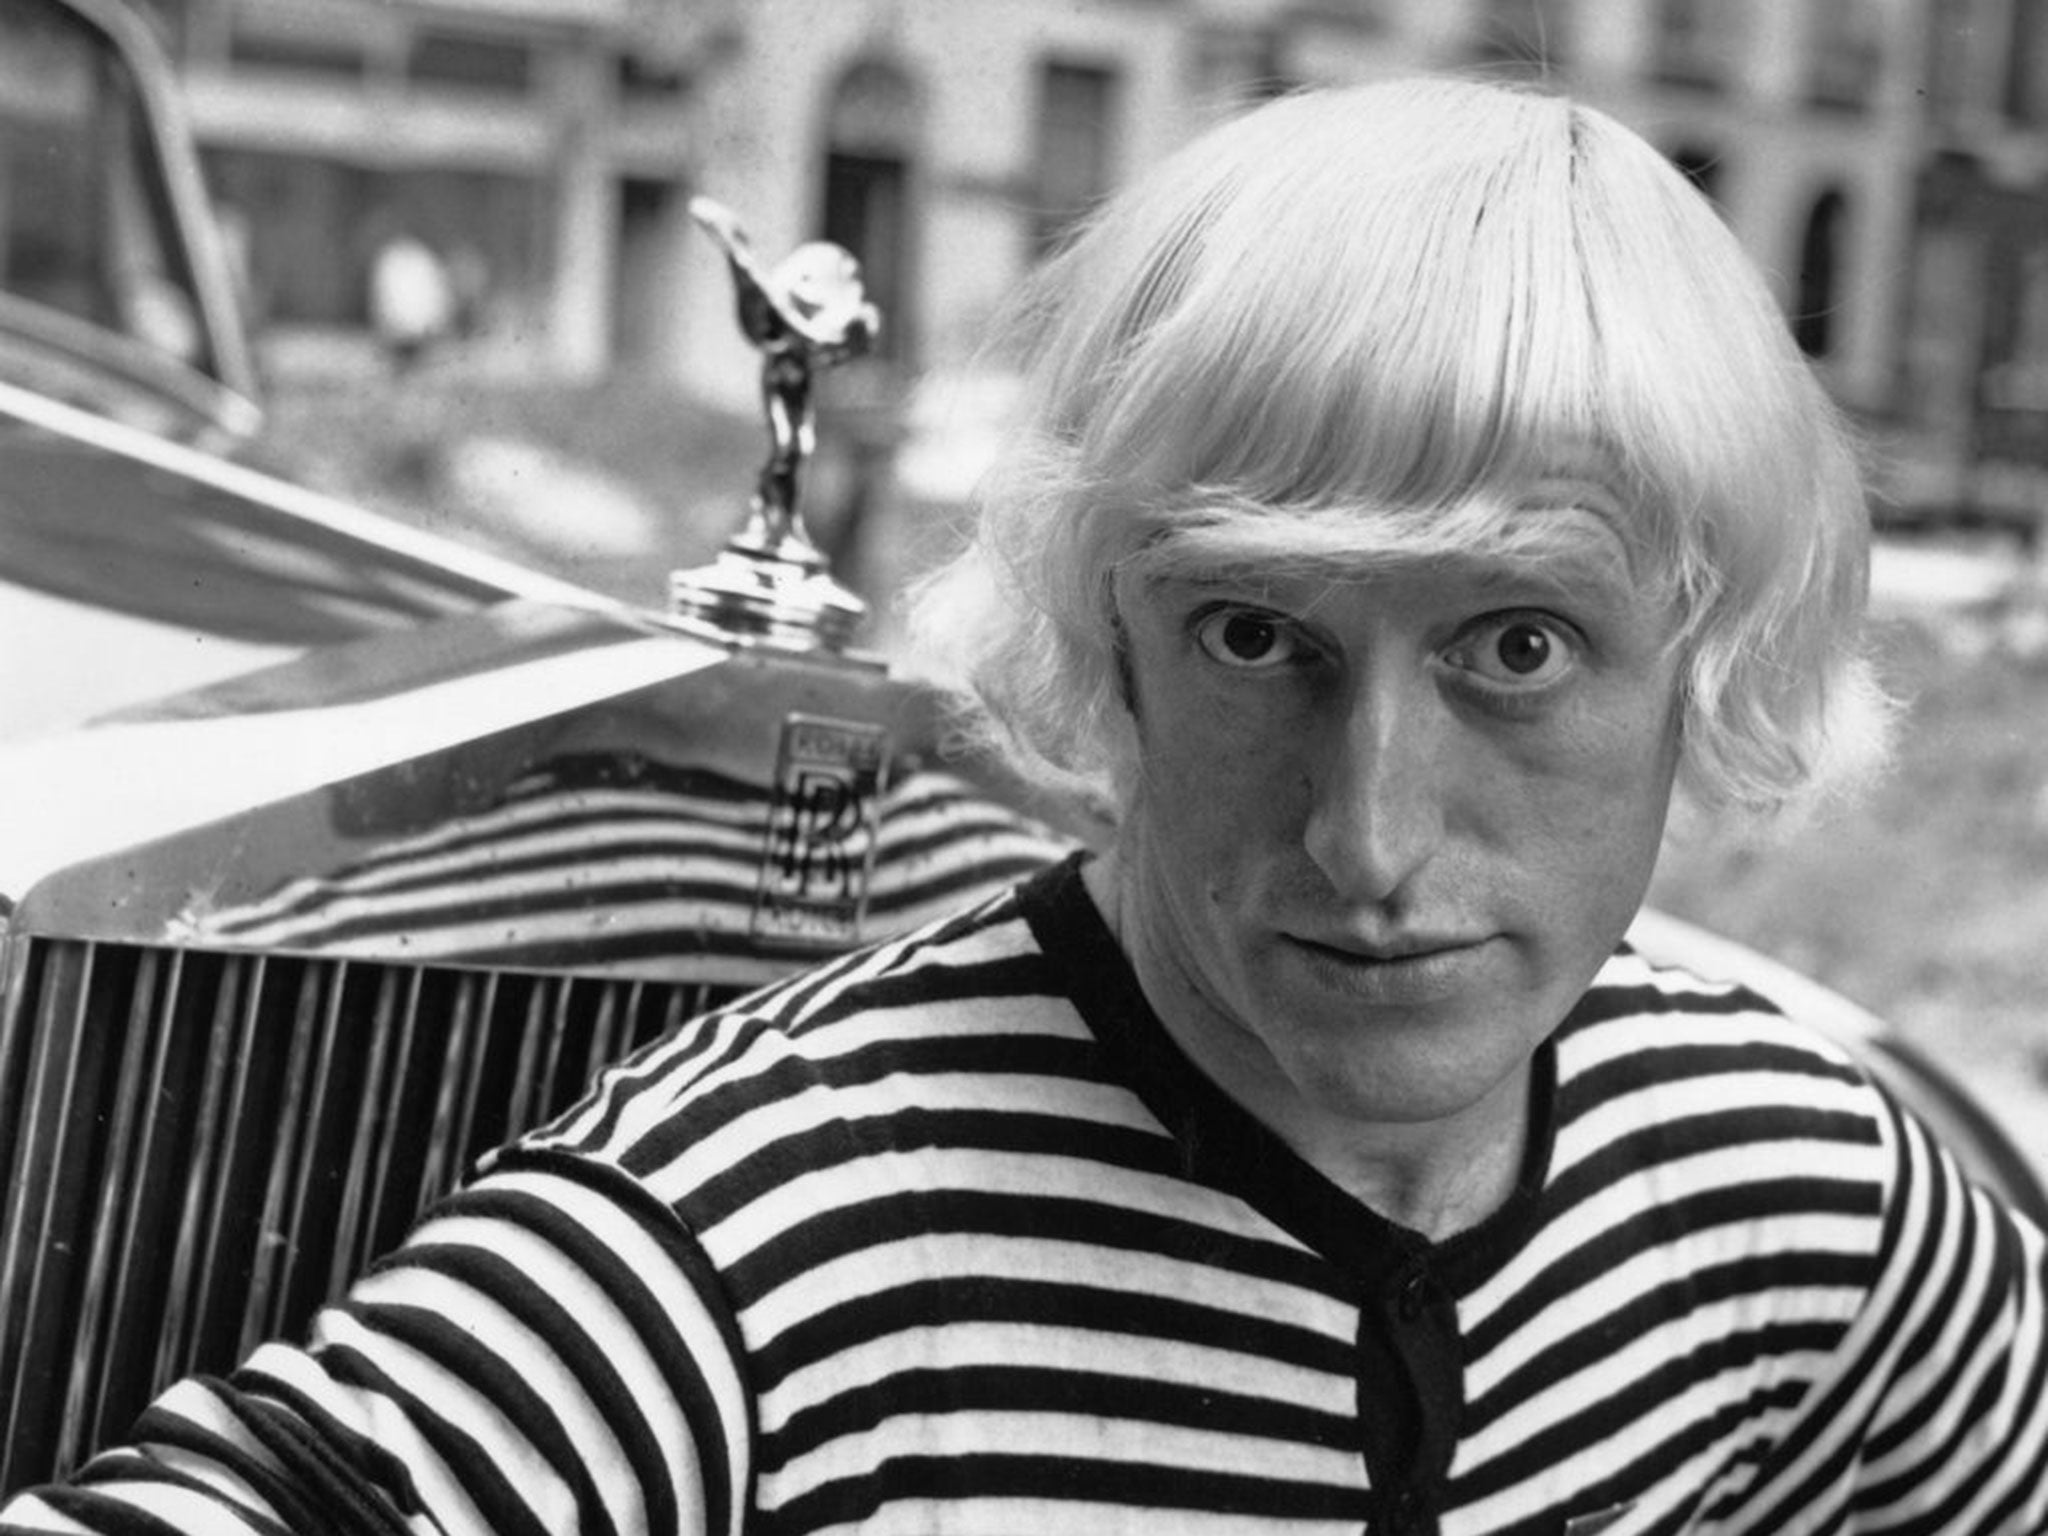 The report finds that Savile carried out sex attacks on 72 victims in “virtually every one of the BBC premises in which he worked”